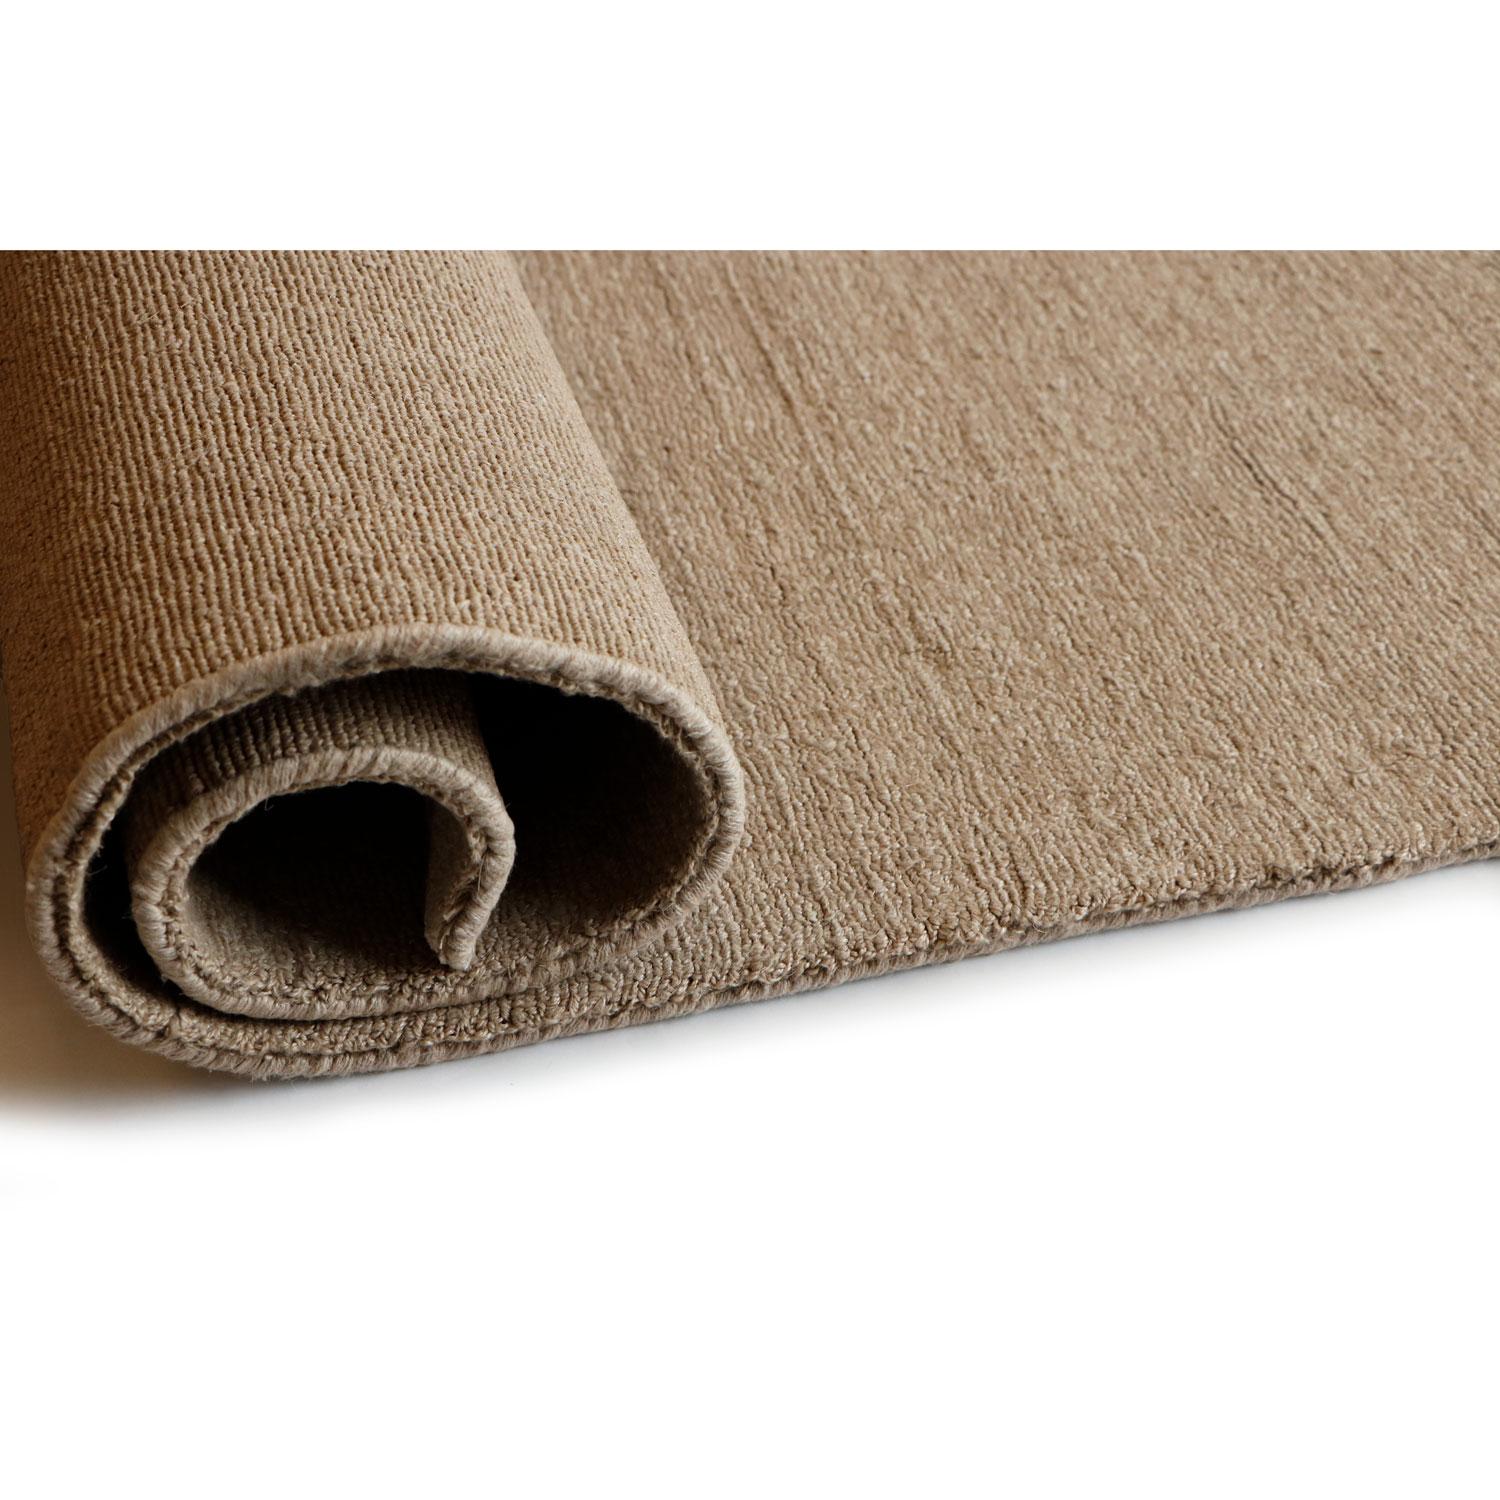 Modern Contemporary Antibacterial Natural Linen Rug by Deanna Comellini 200x300 cm For Sale